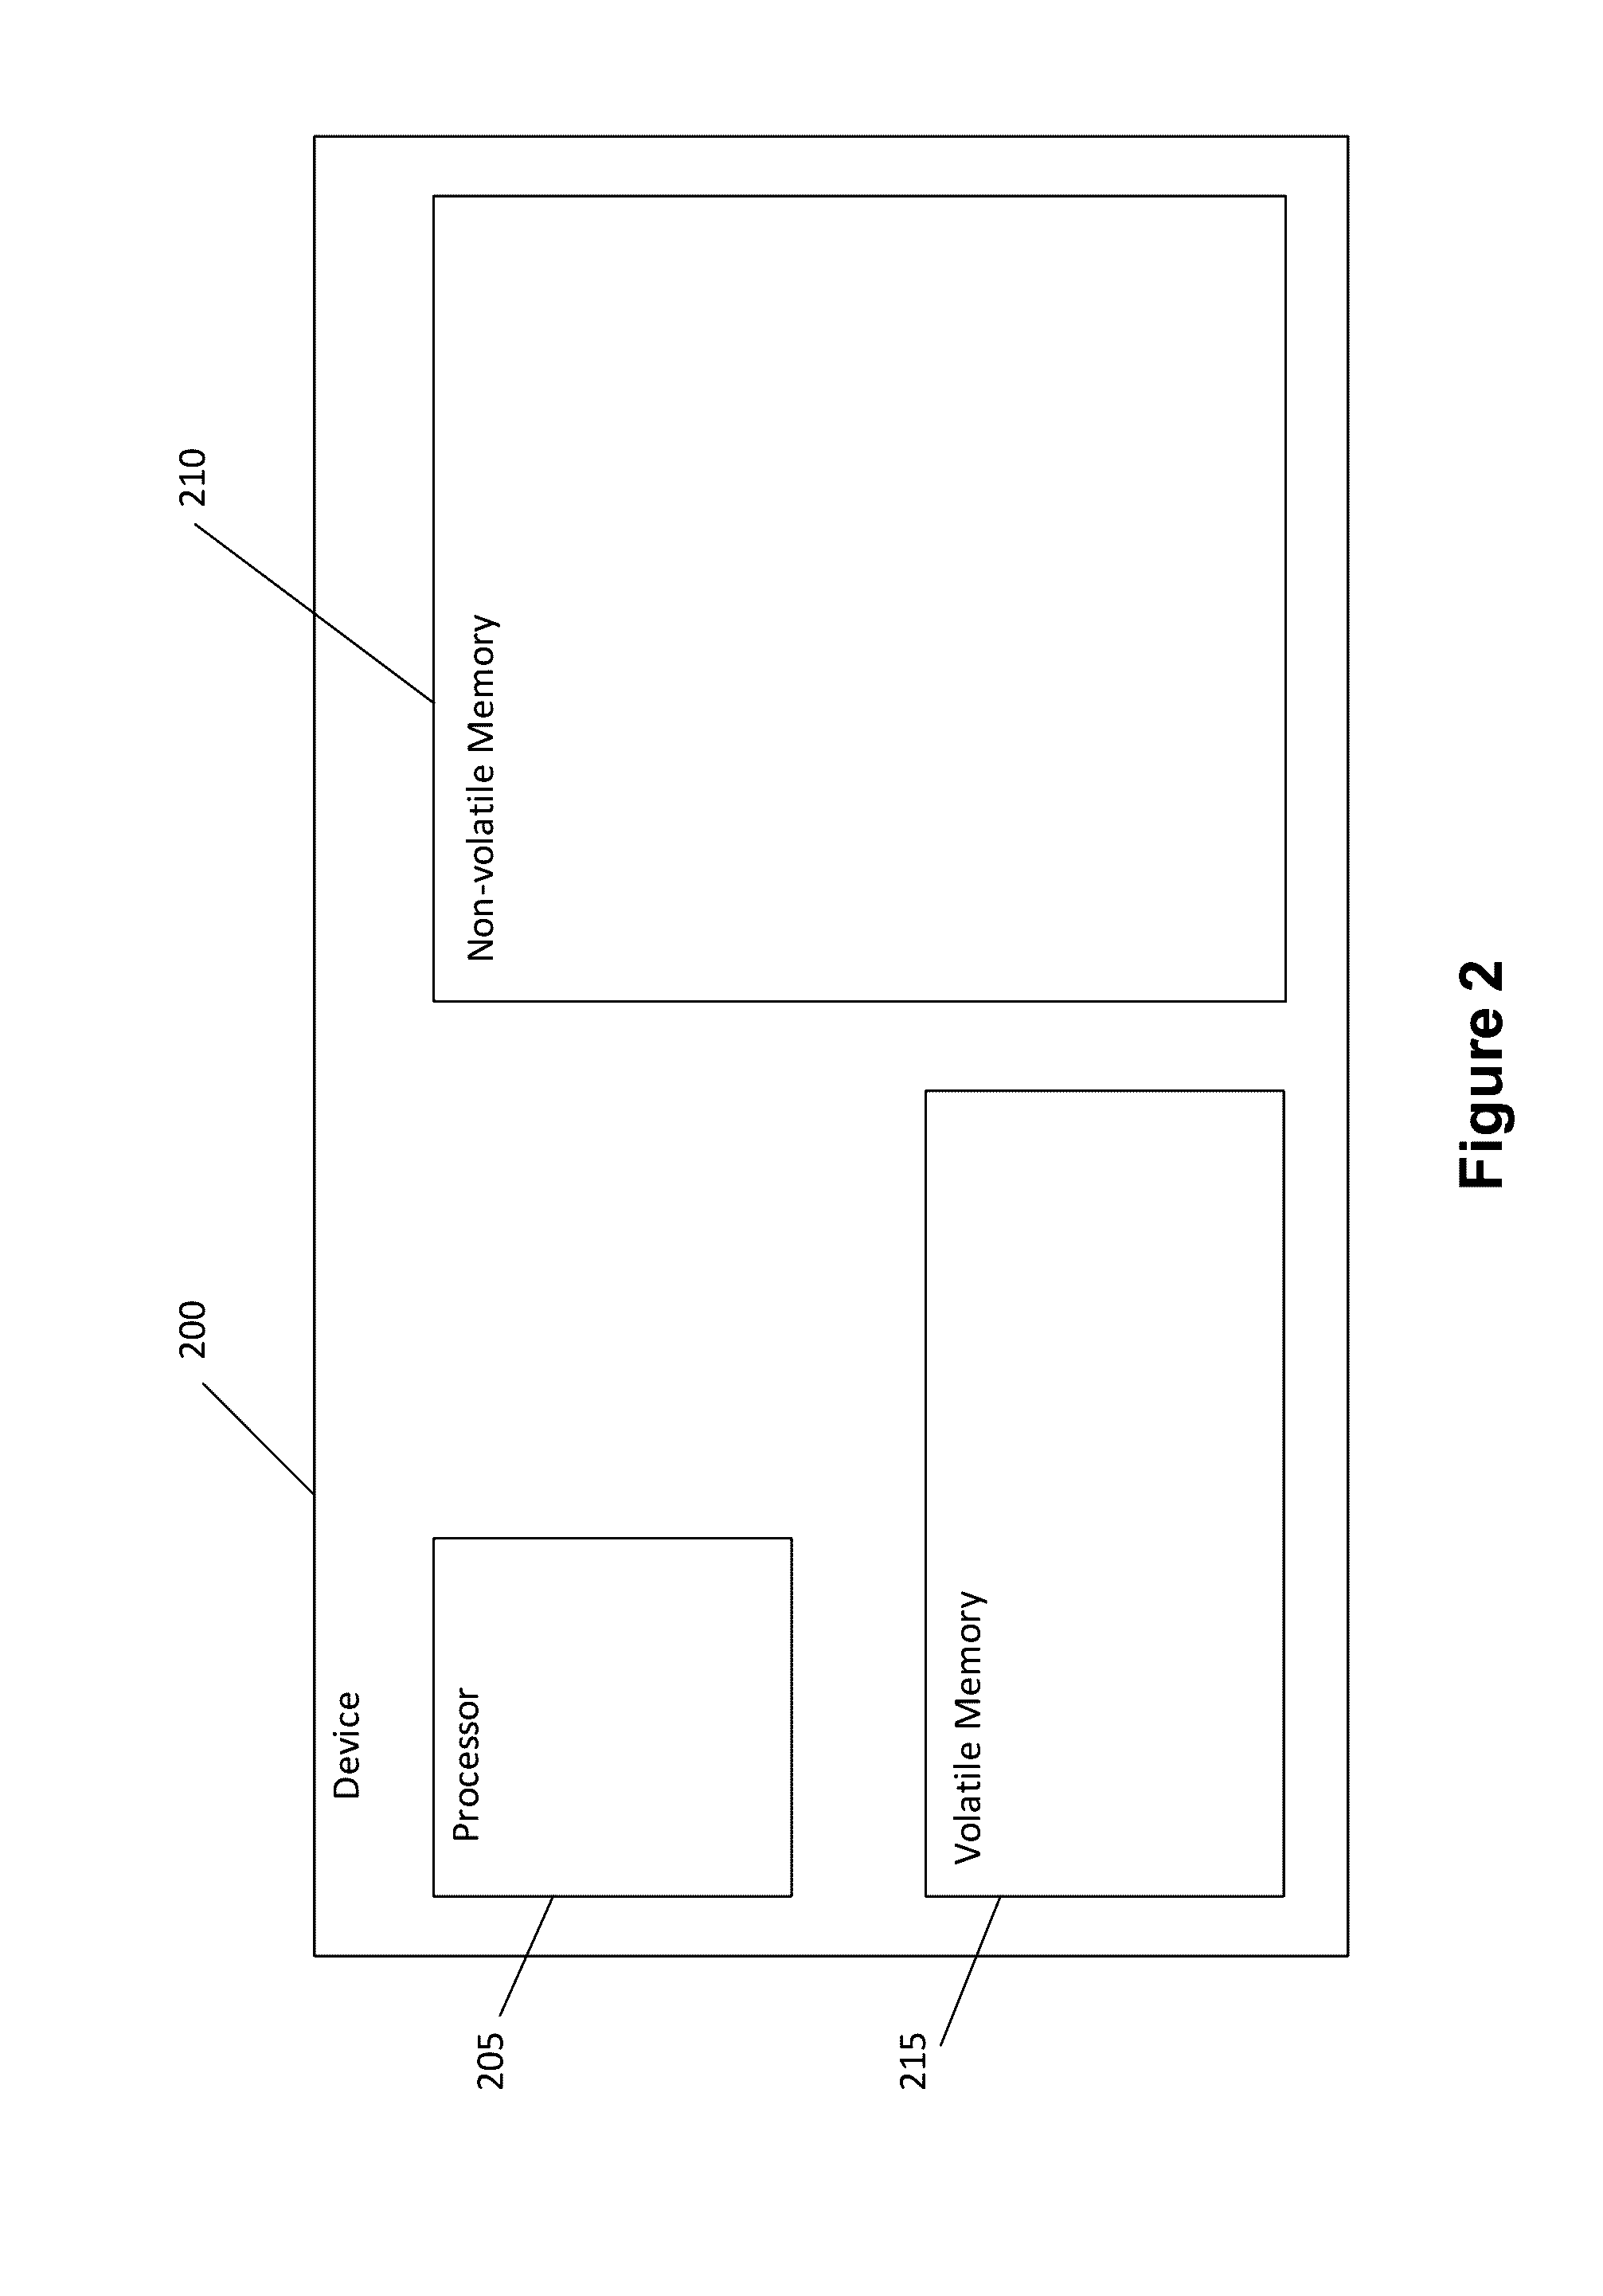 Systems and Methods for Providing Reinforcement Learning in a Deep Learning System